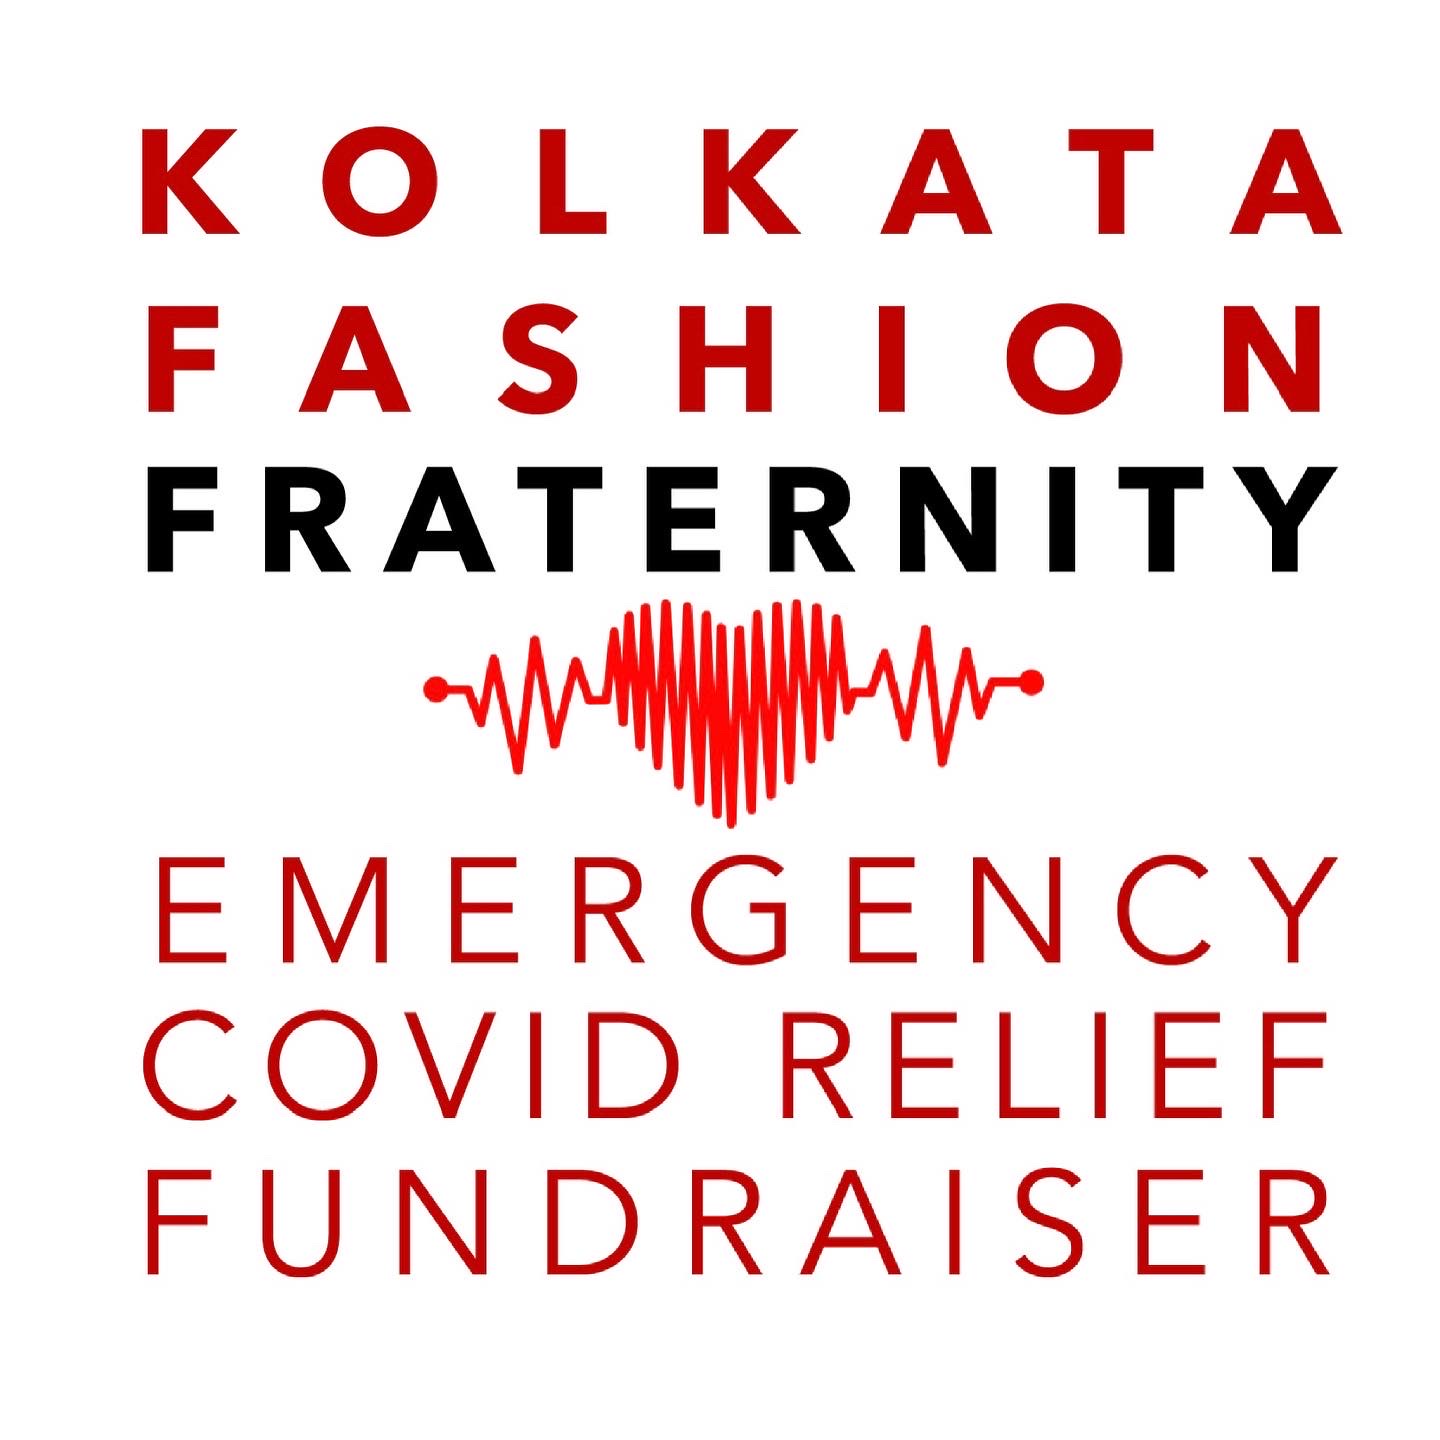 A COVID-19 RELIEF INITIATIVE by the Kolkata Fashion Fraternity